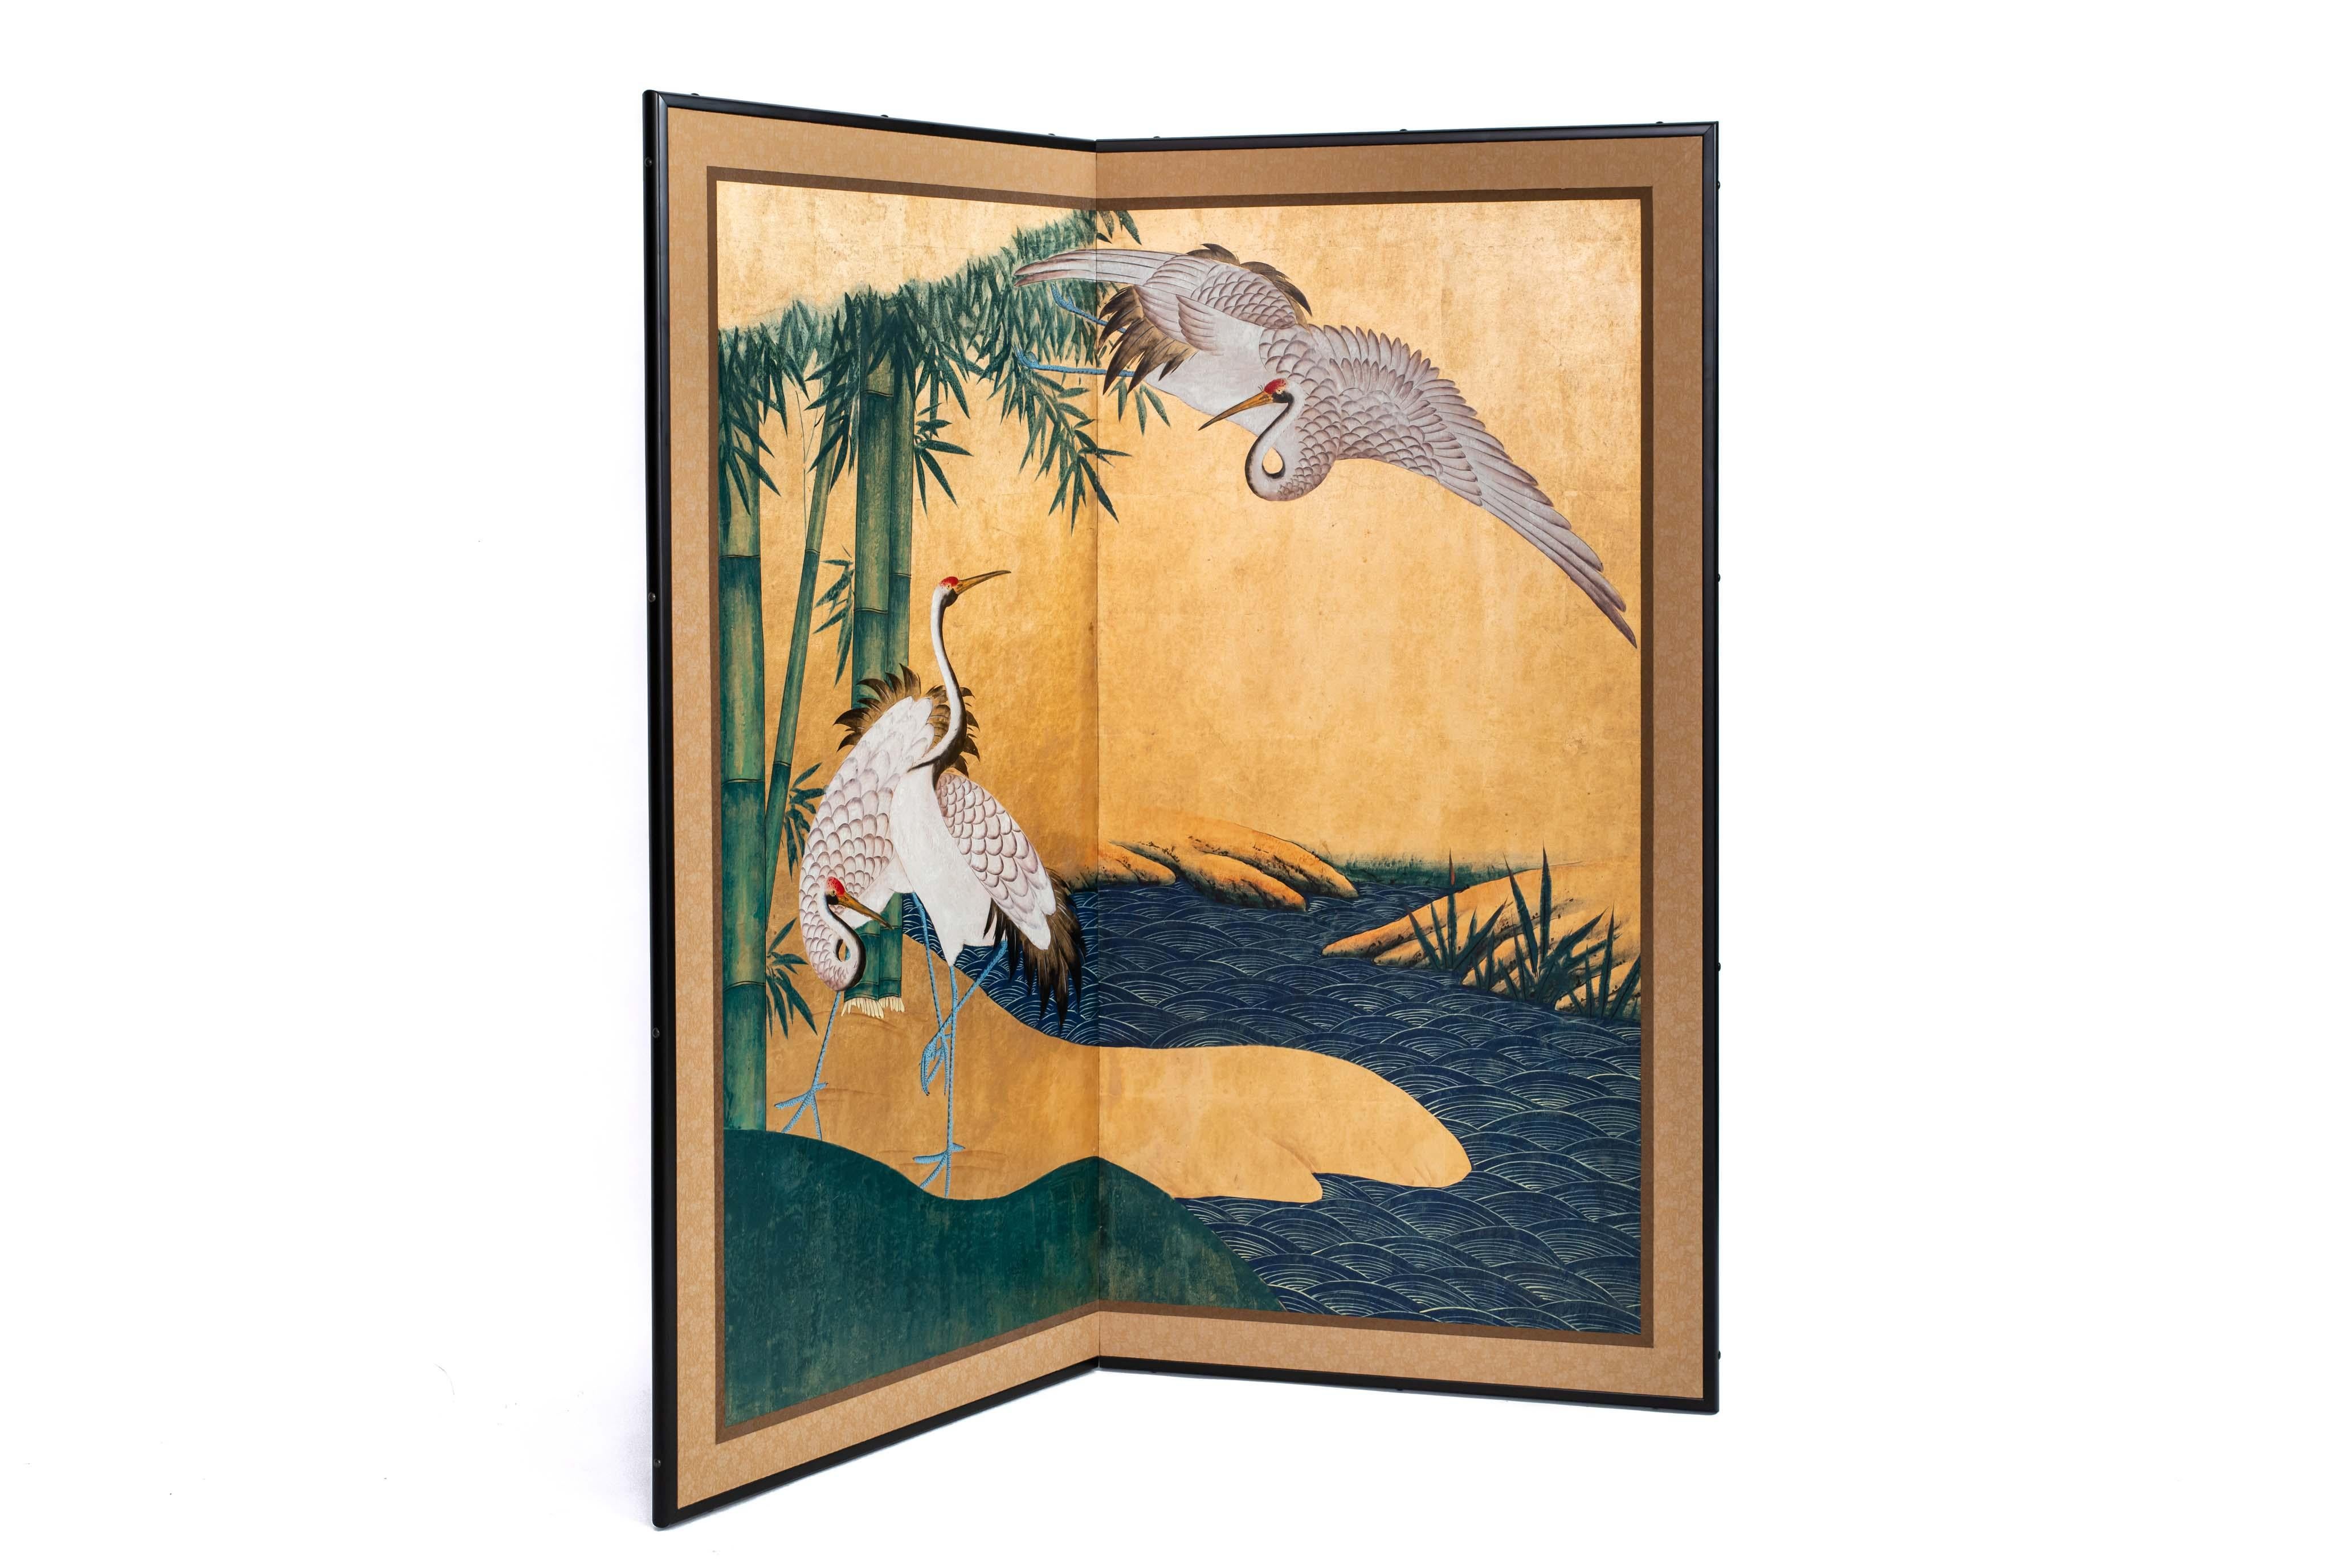 Contemporary Hand-Painted Japanese Screen of Cranes by the River (Handgefertigt) im Angebot